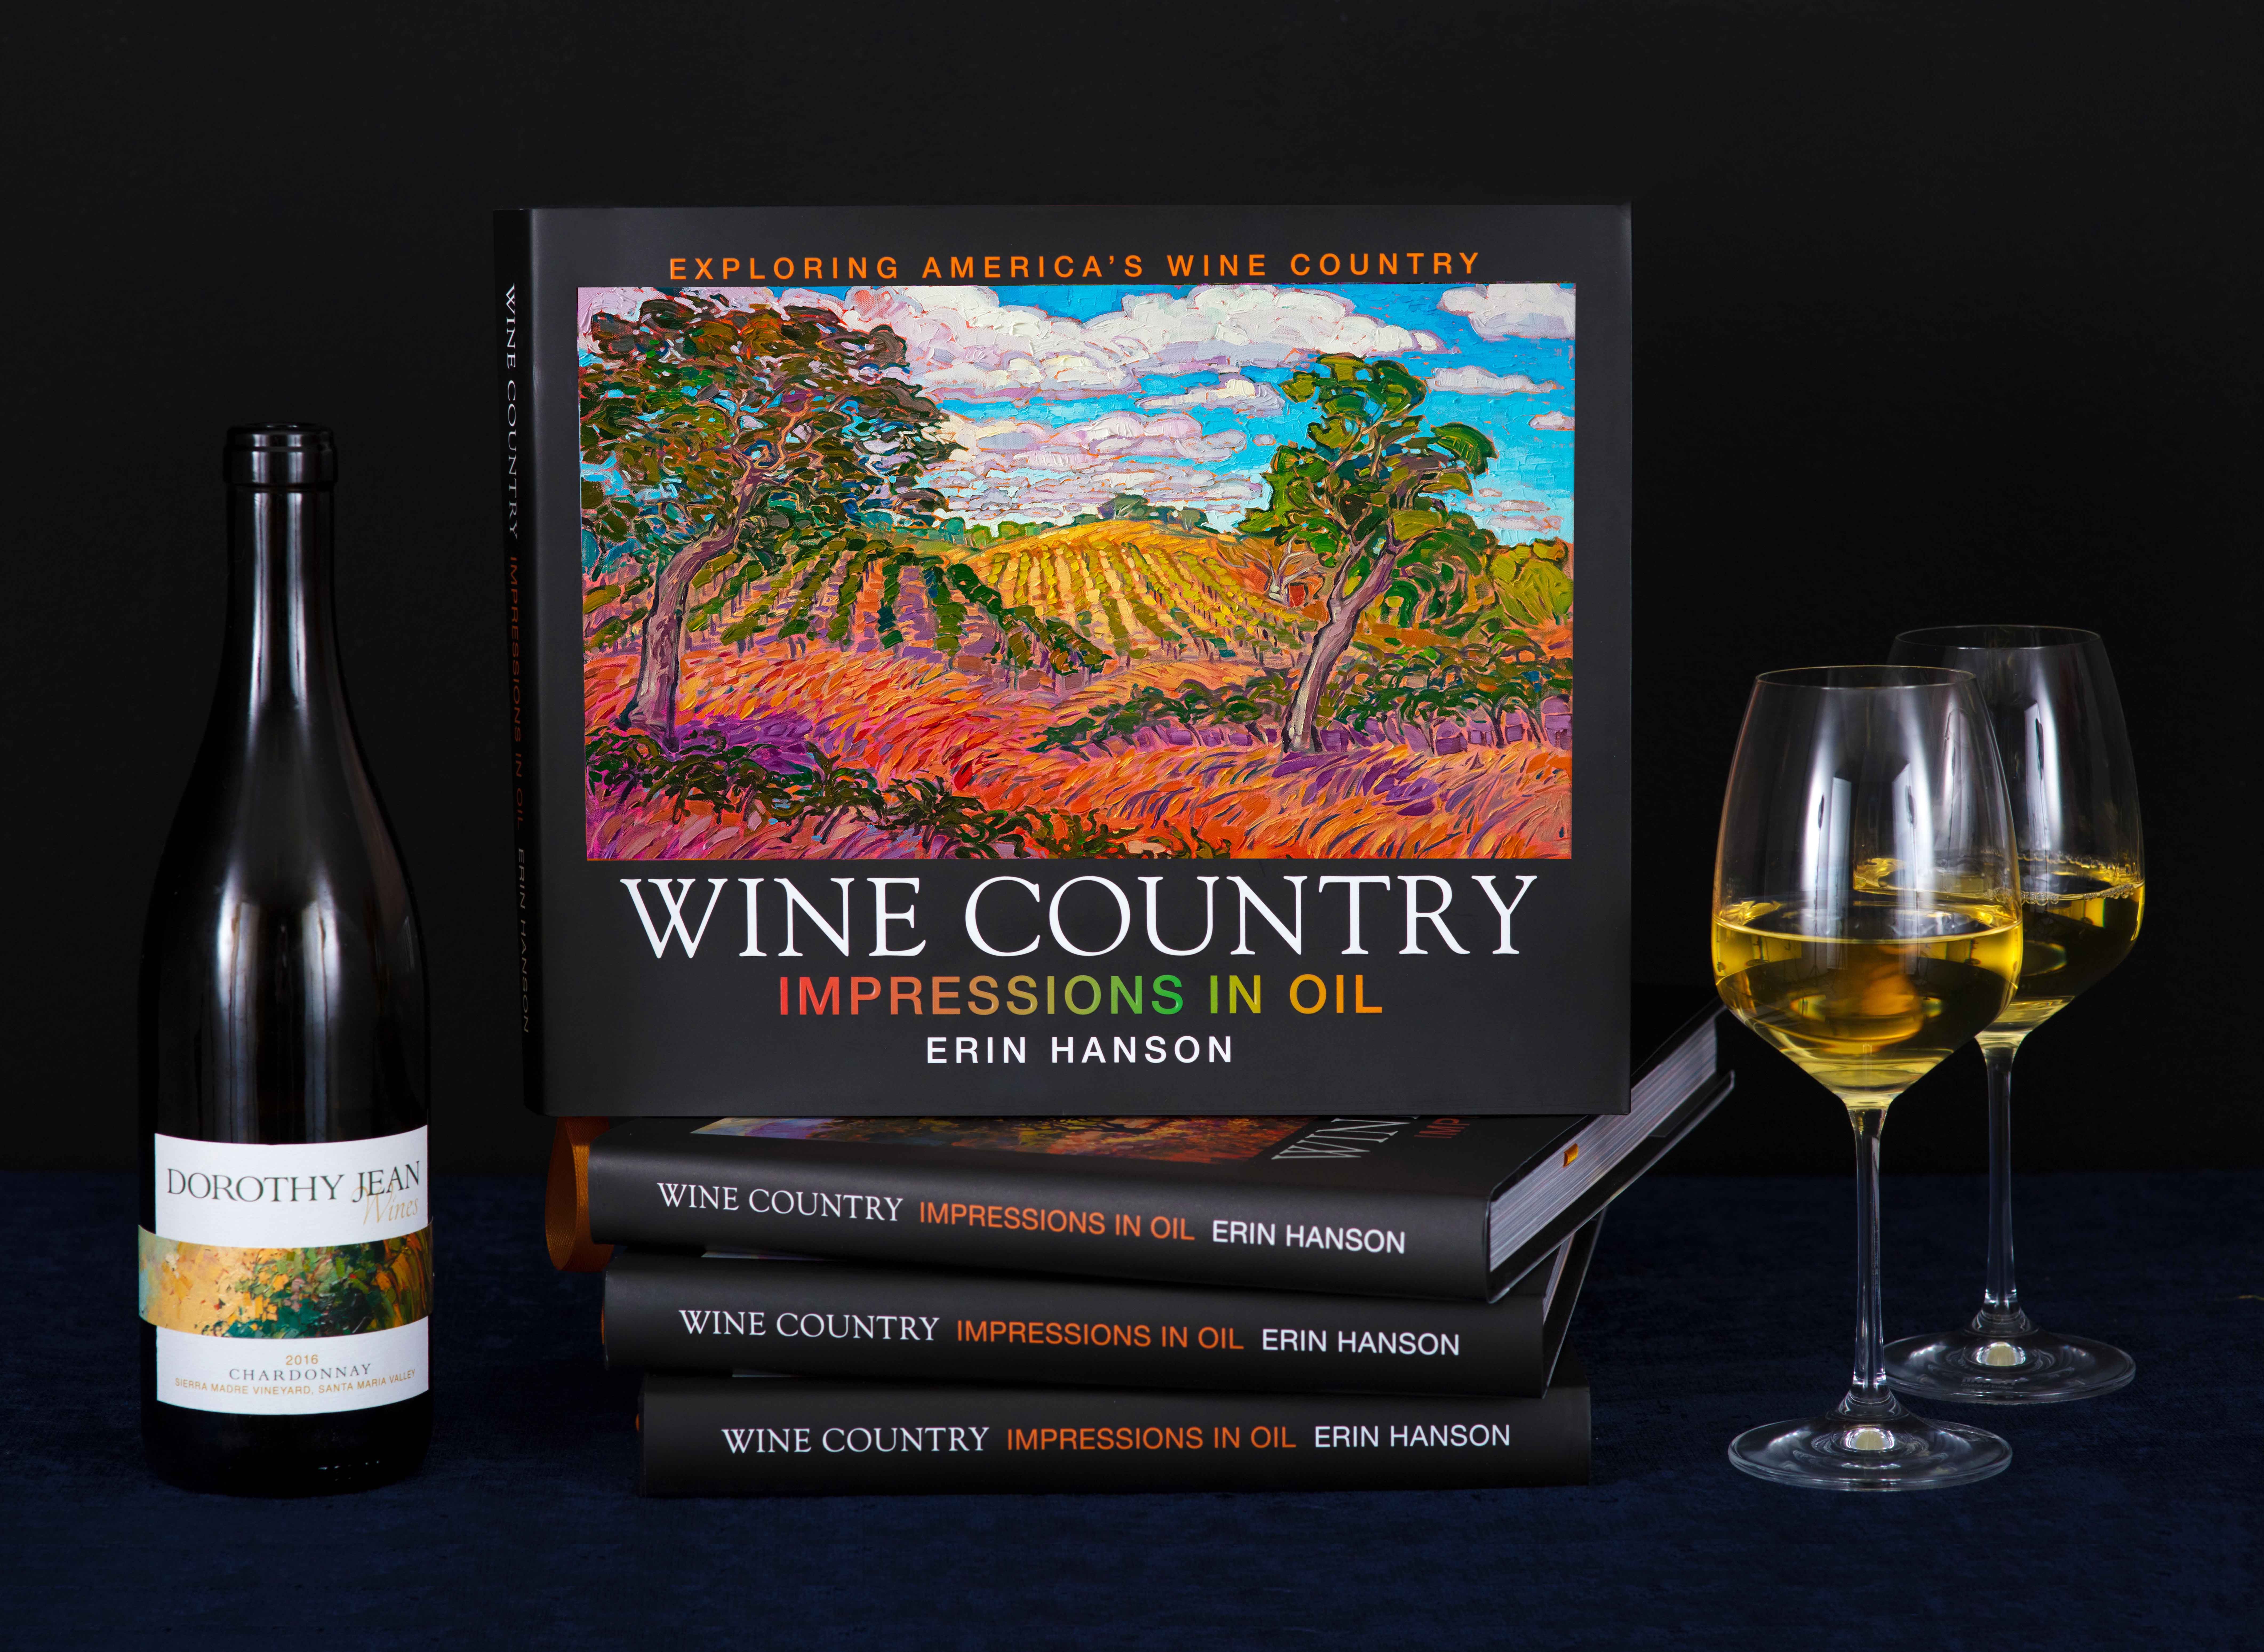 Wine Country: Impressions in Oil